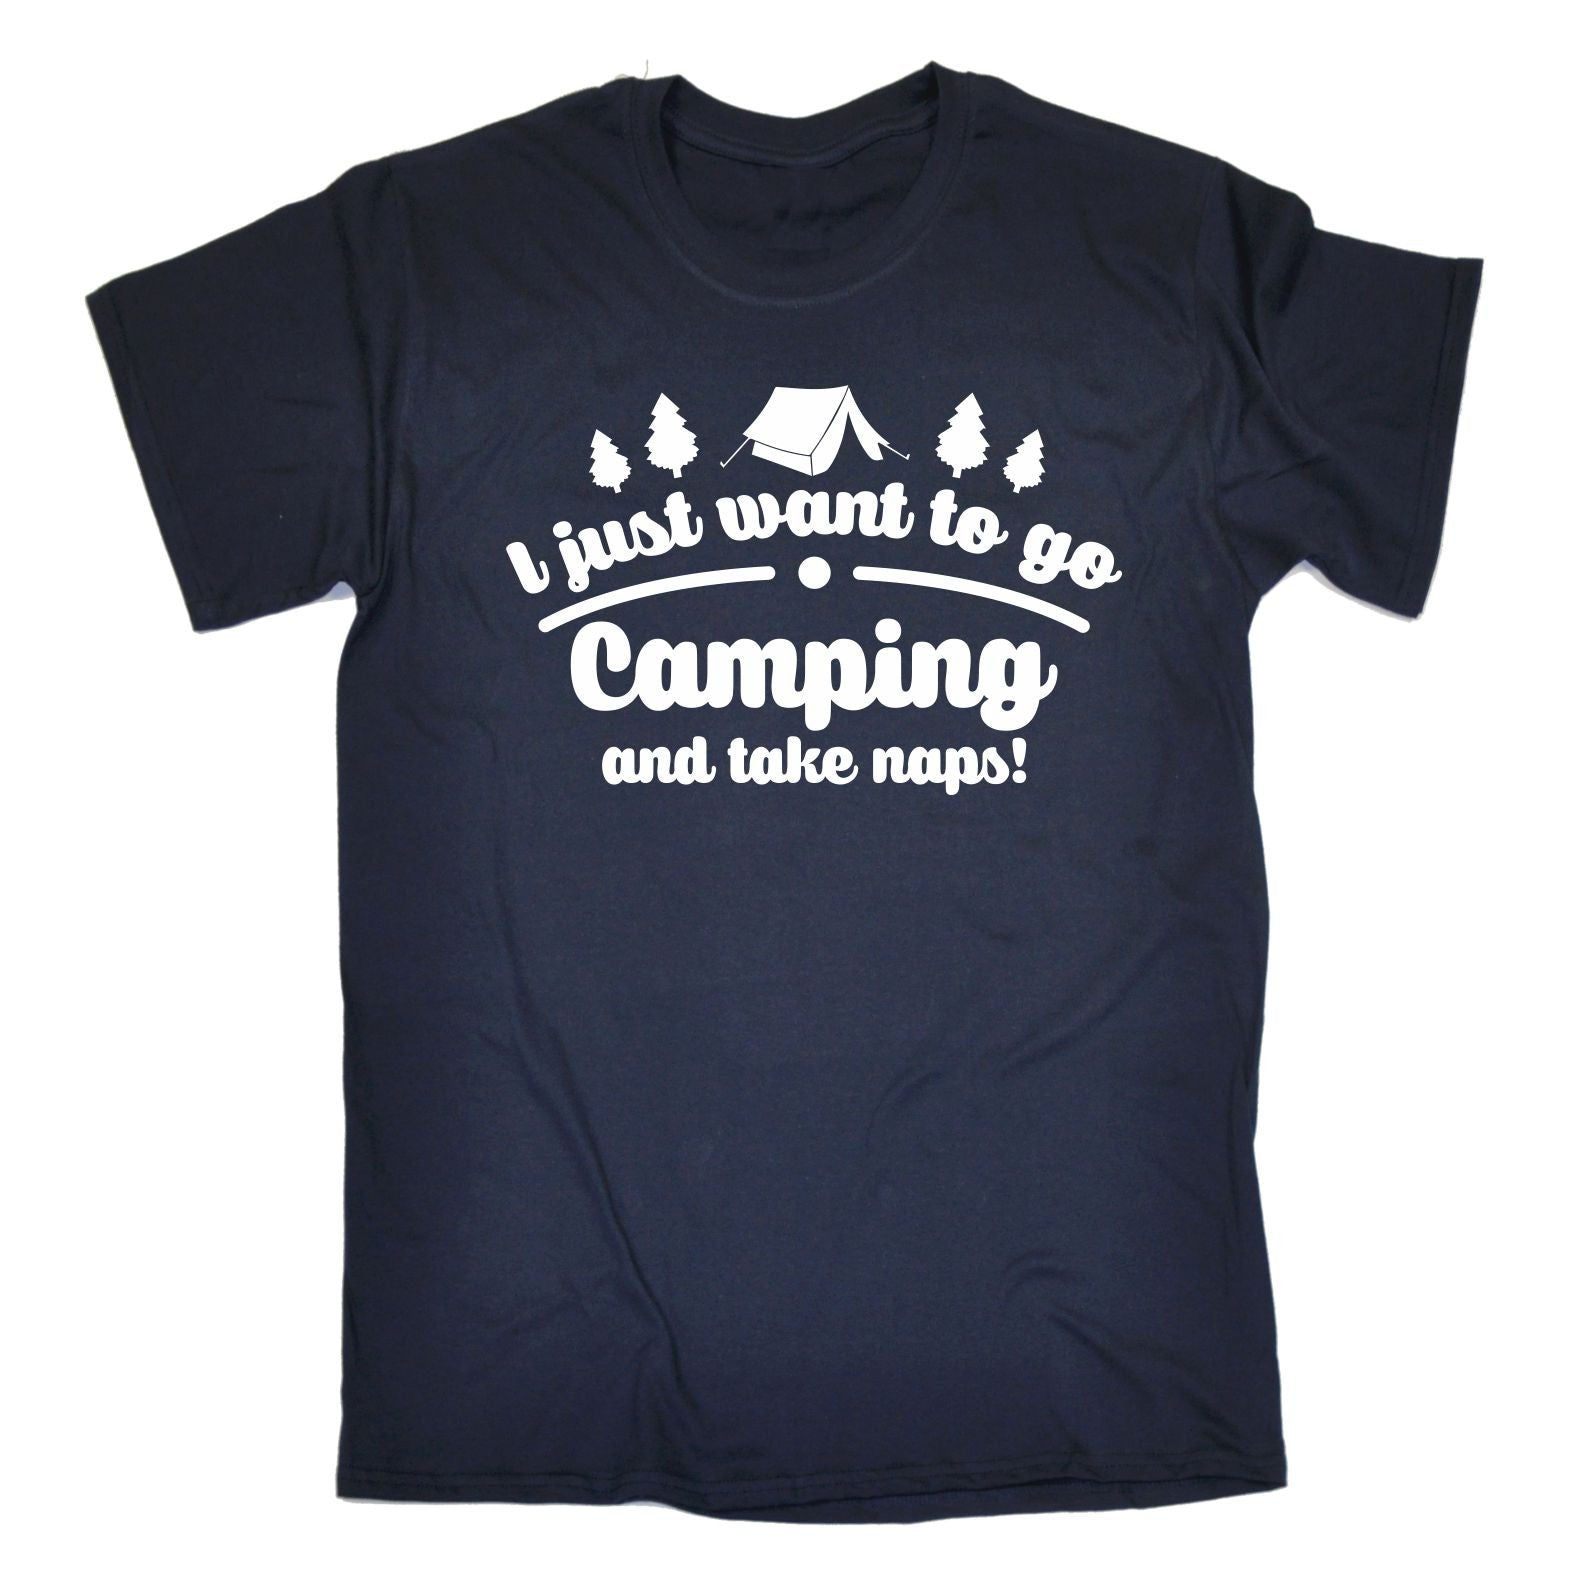 I JUST WANT TO GO CAMPING AND TAKE NAPS T-SHIRT tent camper funny ...